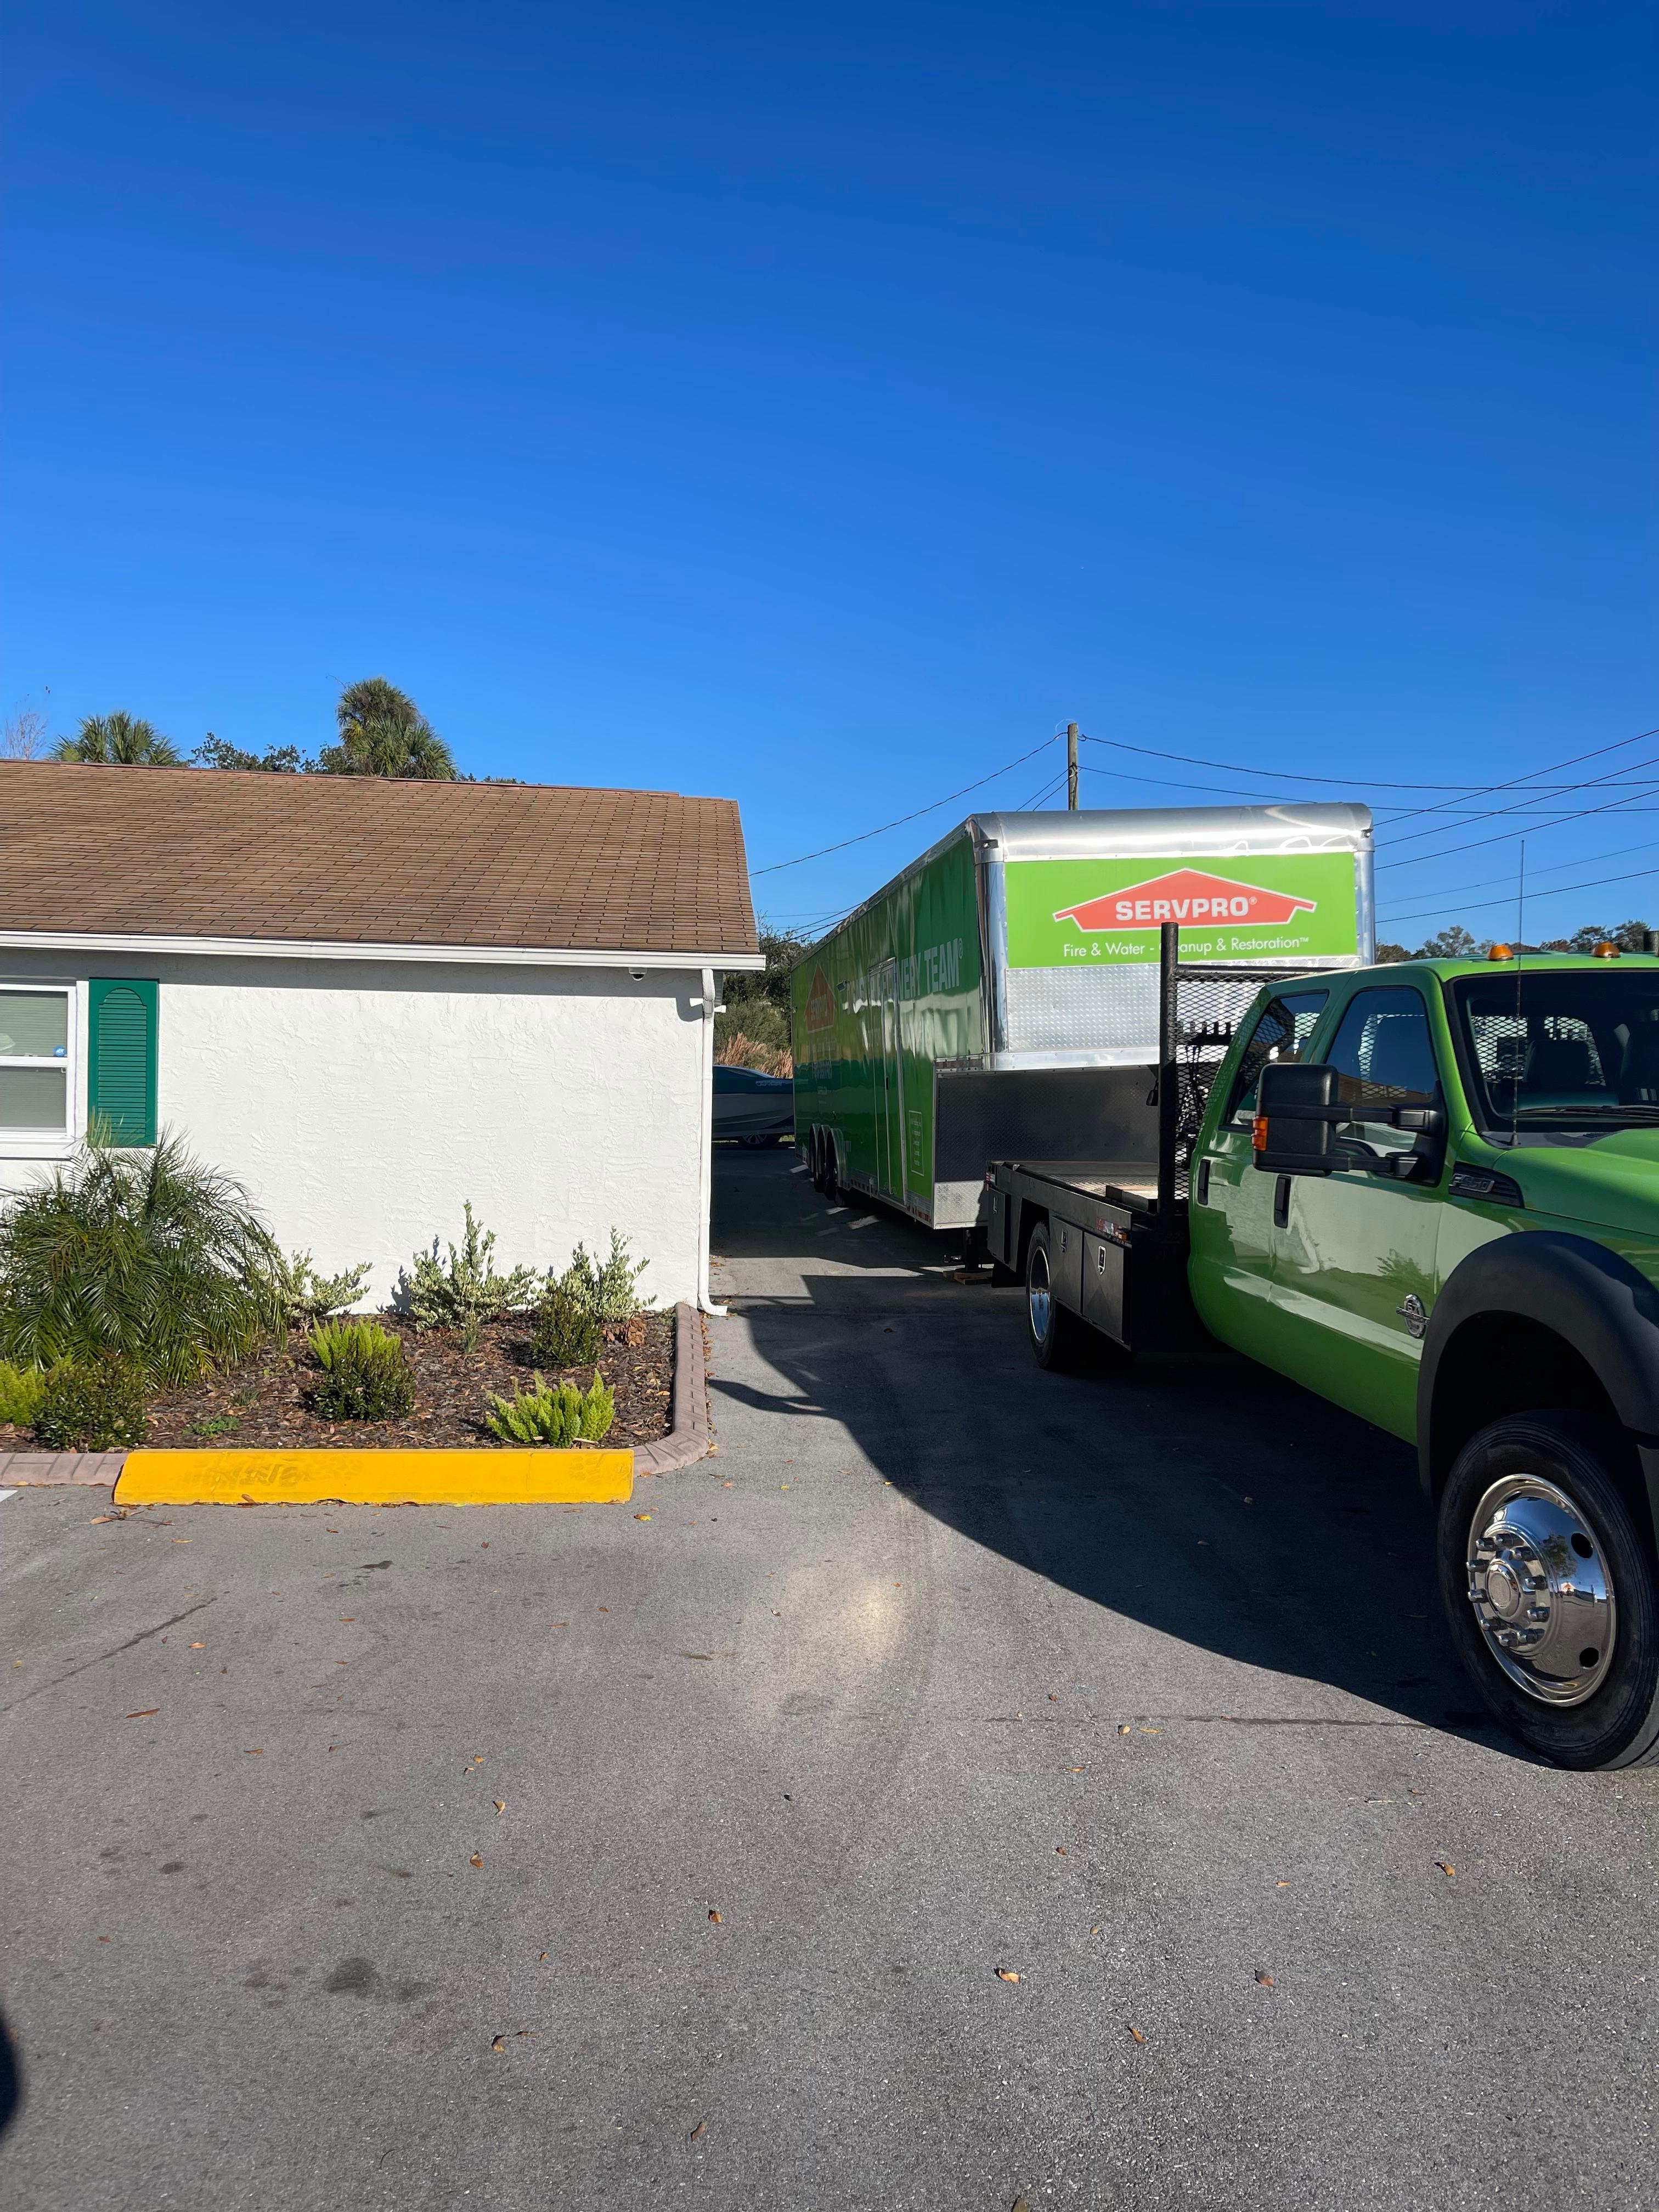 SERVPRO front office and storm trailer